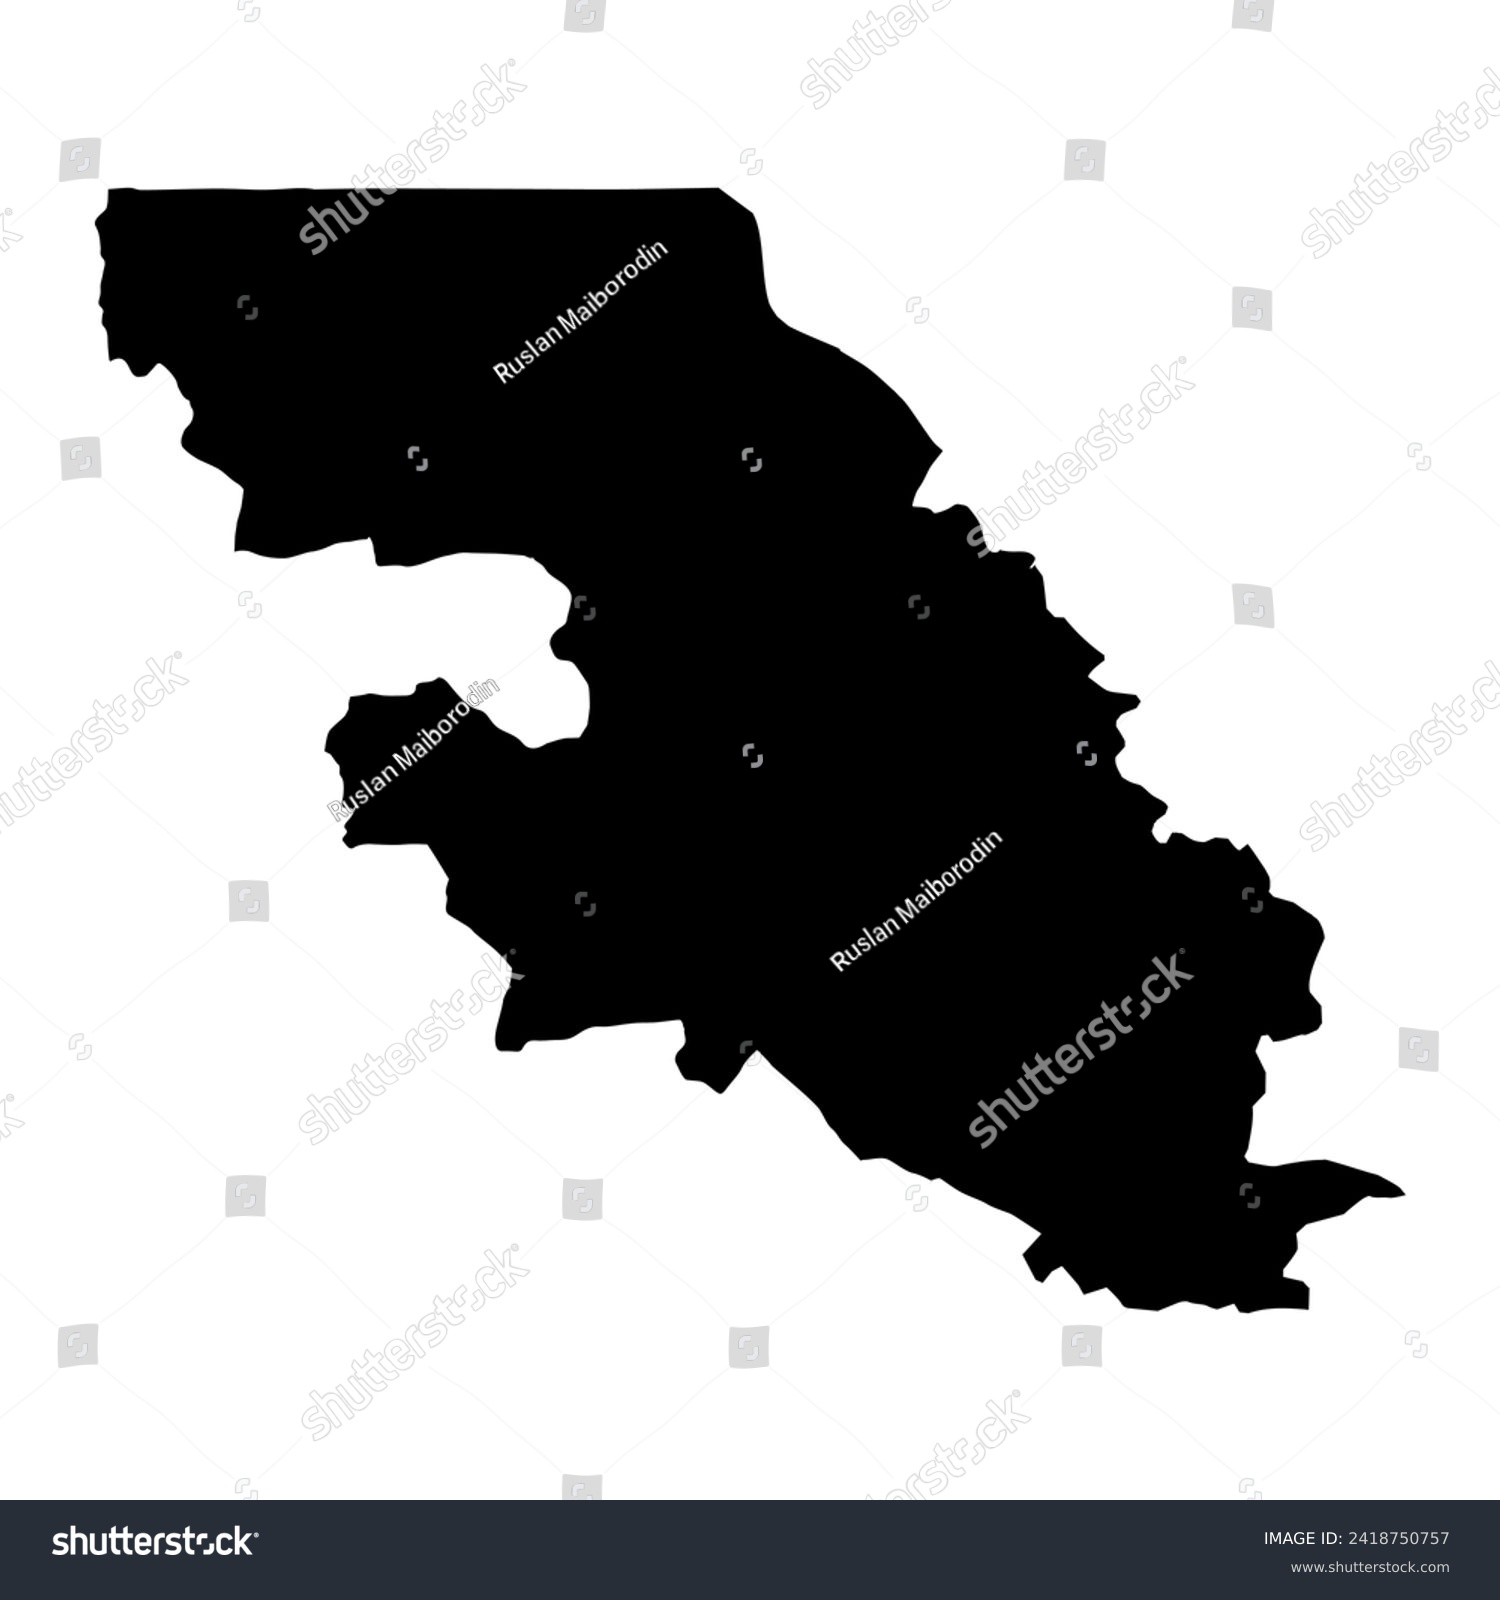 Falaba District map, administrative division of Sierra Leone. Vector illustration. #2418750757